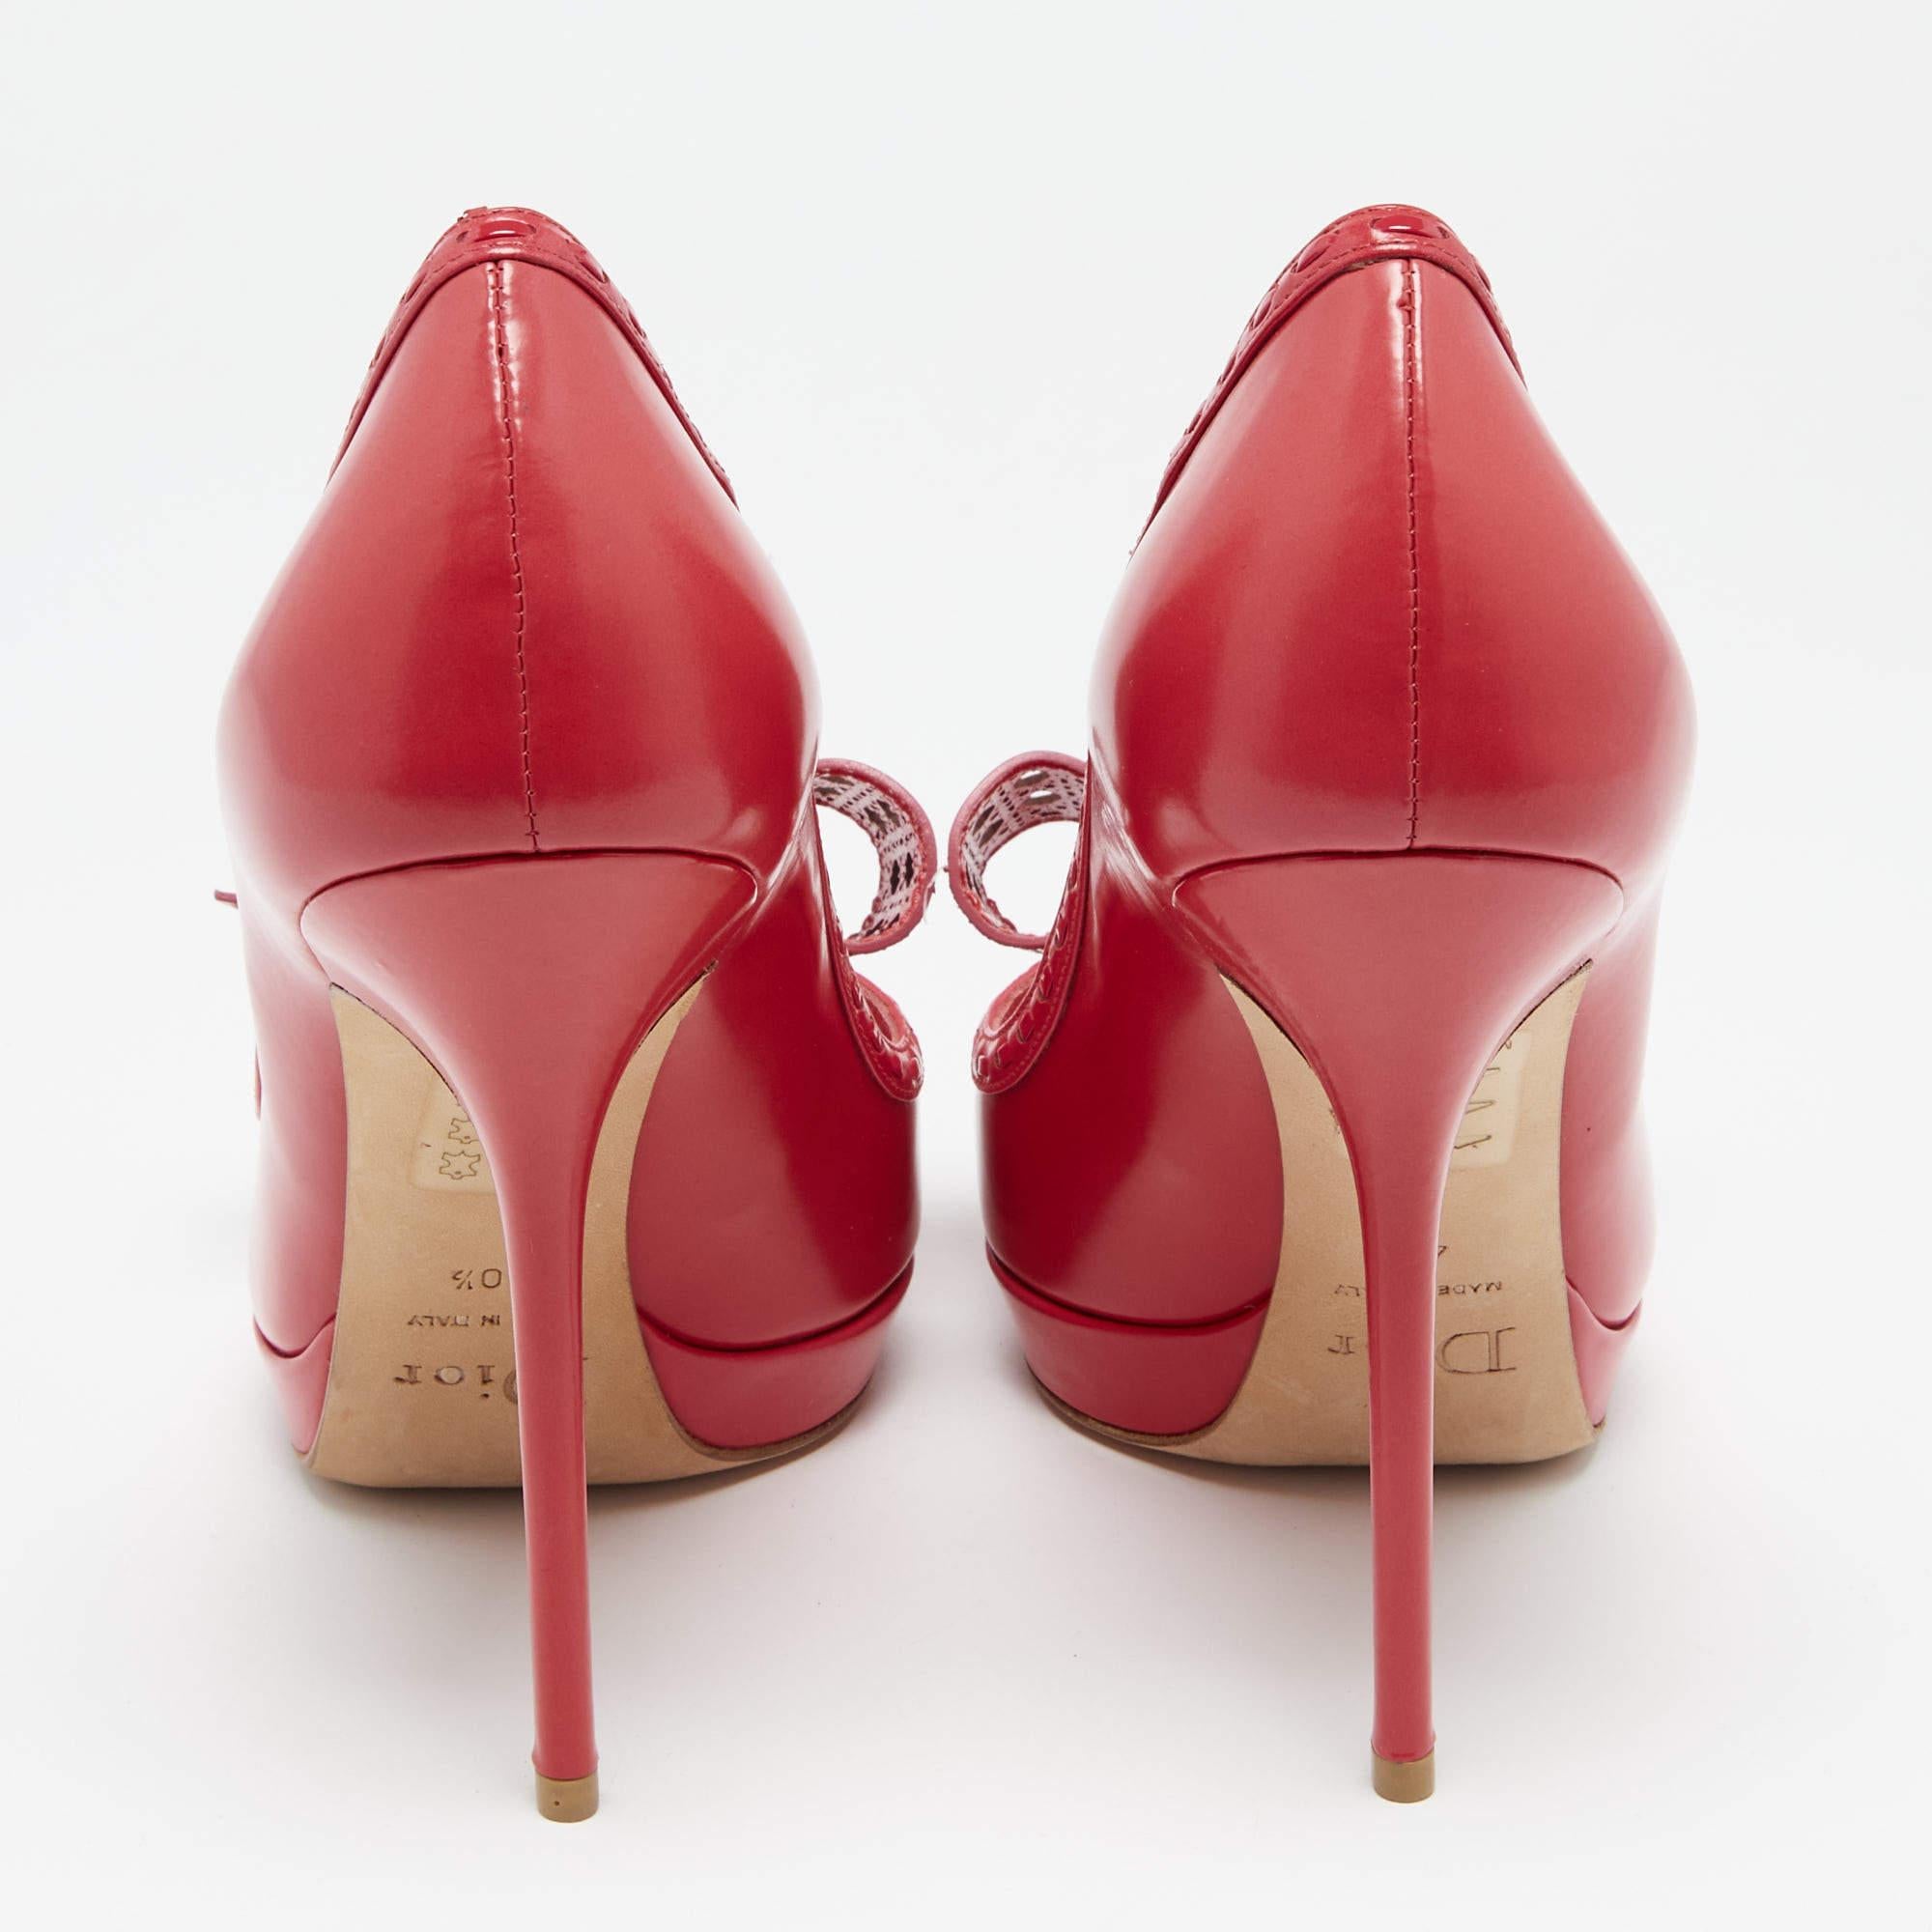 Dior Imperial Red Cannage Leather Peep Toe Bow Detail Platform Pumps Size 40.5 In Good Condition For Sale In Dubai, Al Qouz 2